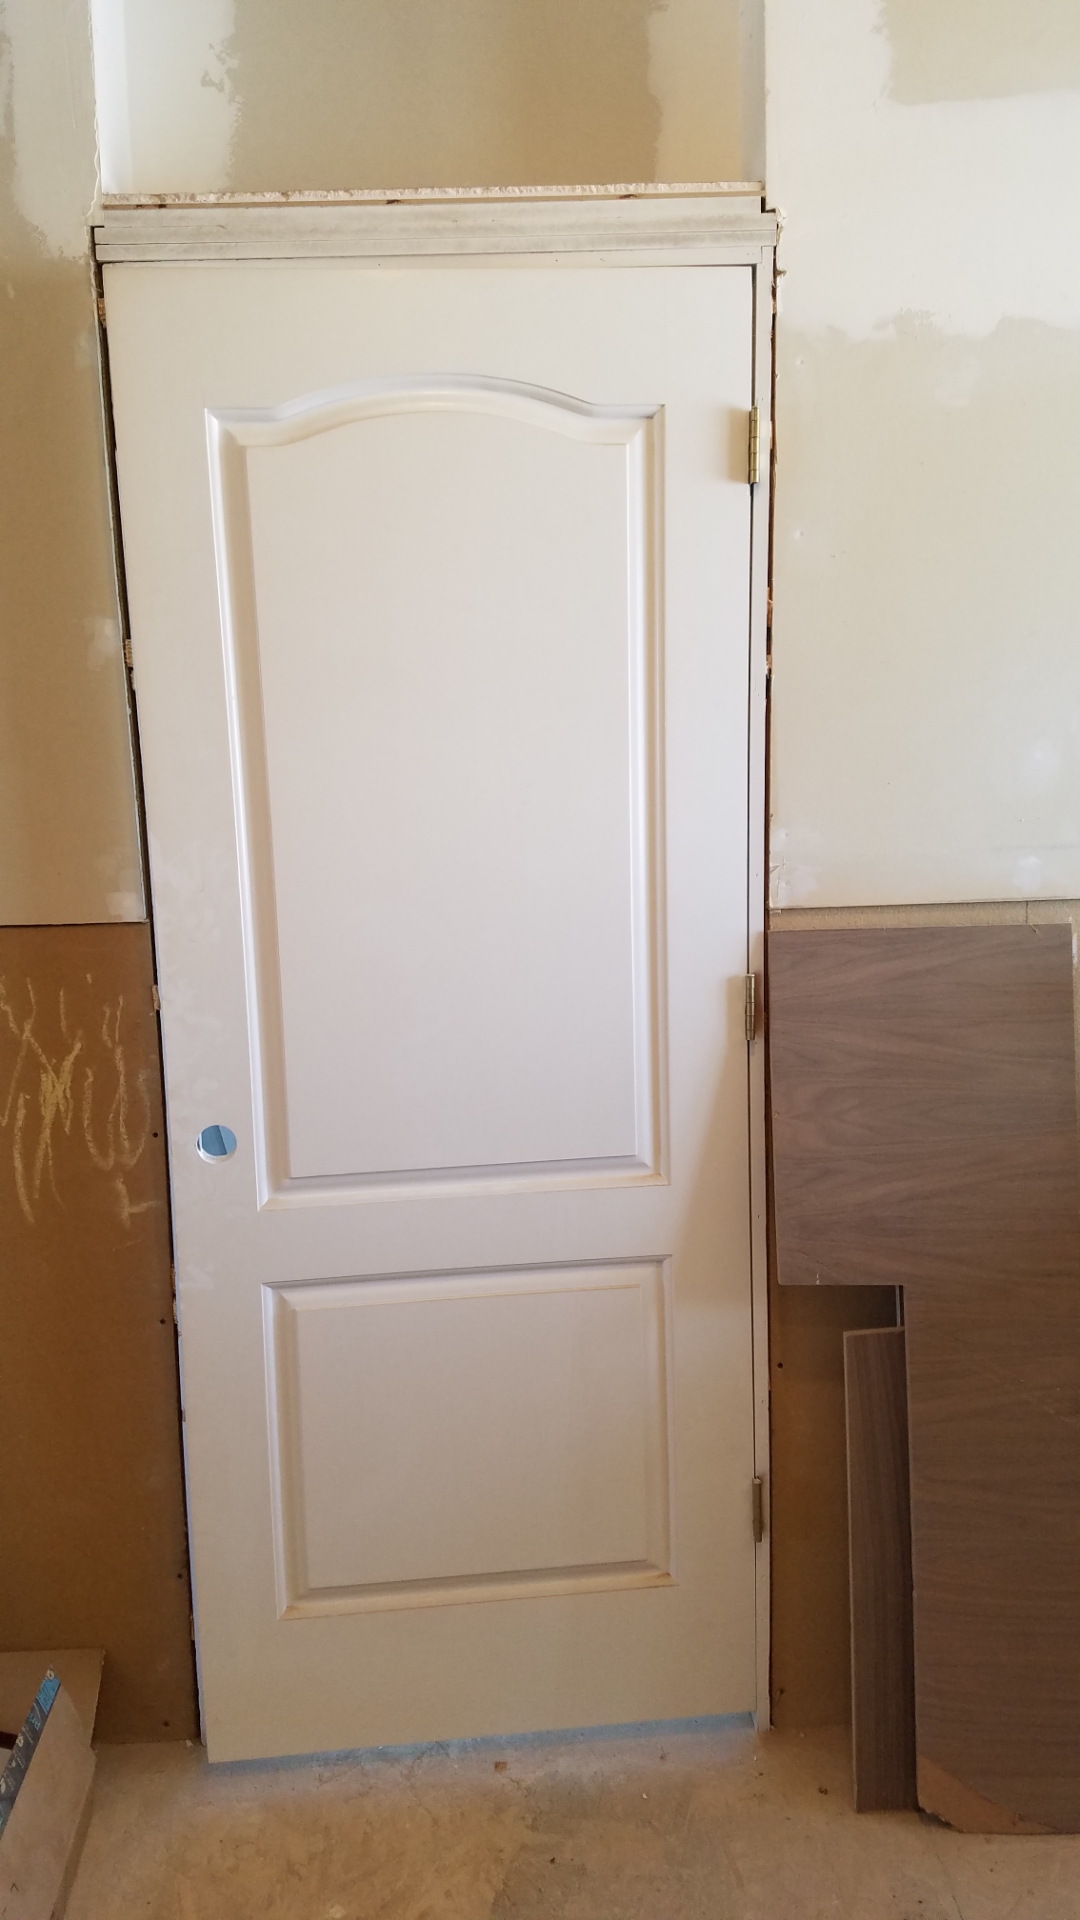 A white solid wood door with a fresh coat of paint hung in a door frame in an unfinished room with sound board on the walls